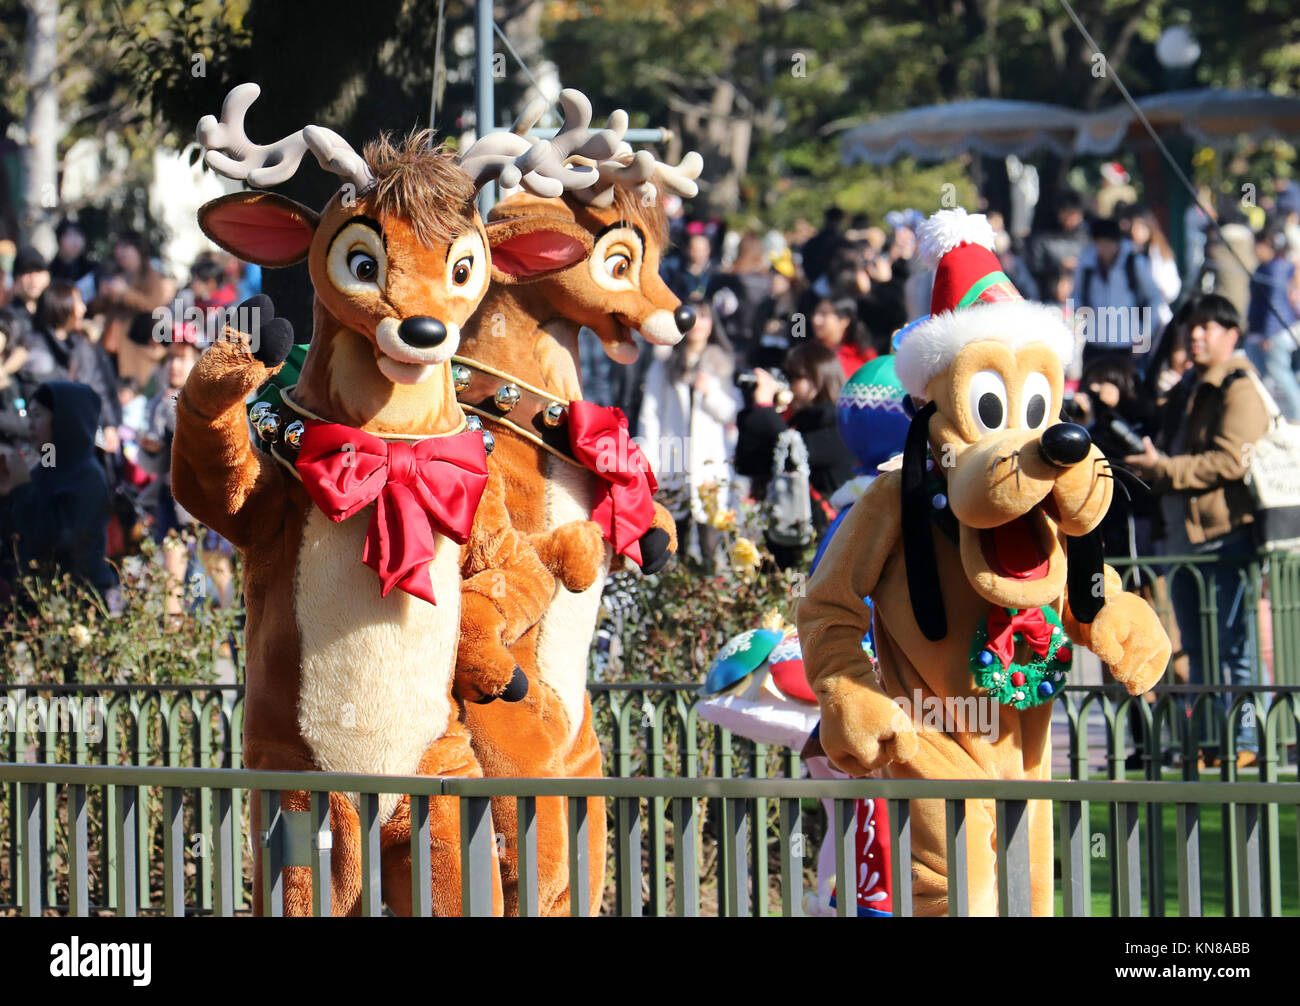 Monday. 11th Dec, 2007. December 11 2017, Urayasu, Japan - Disney character Pluto and reindeers perform during a parade for Christmas 'Disney Christmas Stories' at the Tokyo Disneyland in Urayasu, suburban Tokyo on Monday, December 11, 2007. Disney characters performed as part of Christmas show which would be carried through Christmas Day. Credit: Yoshio Tsunoda/AFLO/Alamy Live News Stock Photo